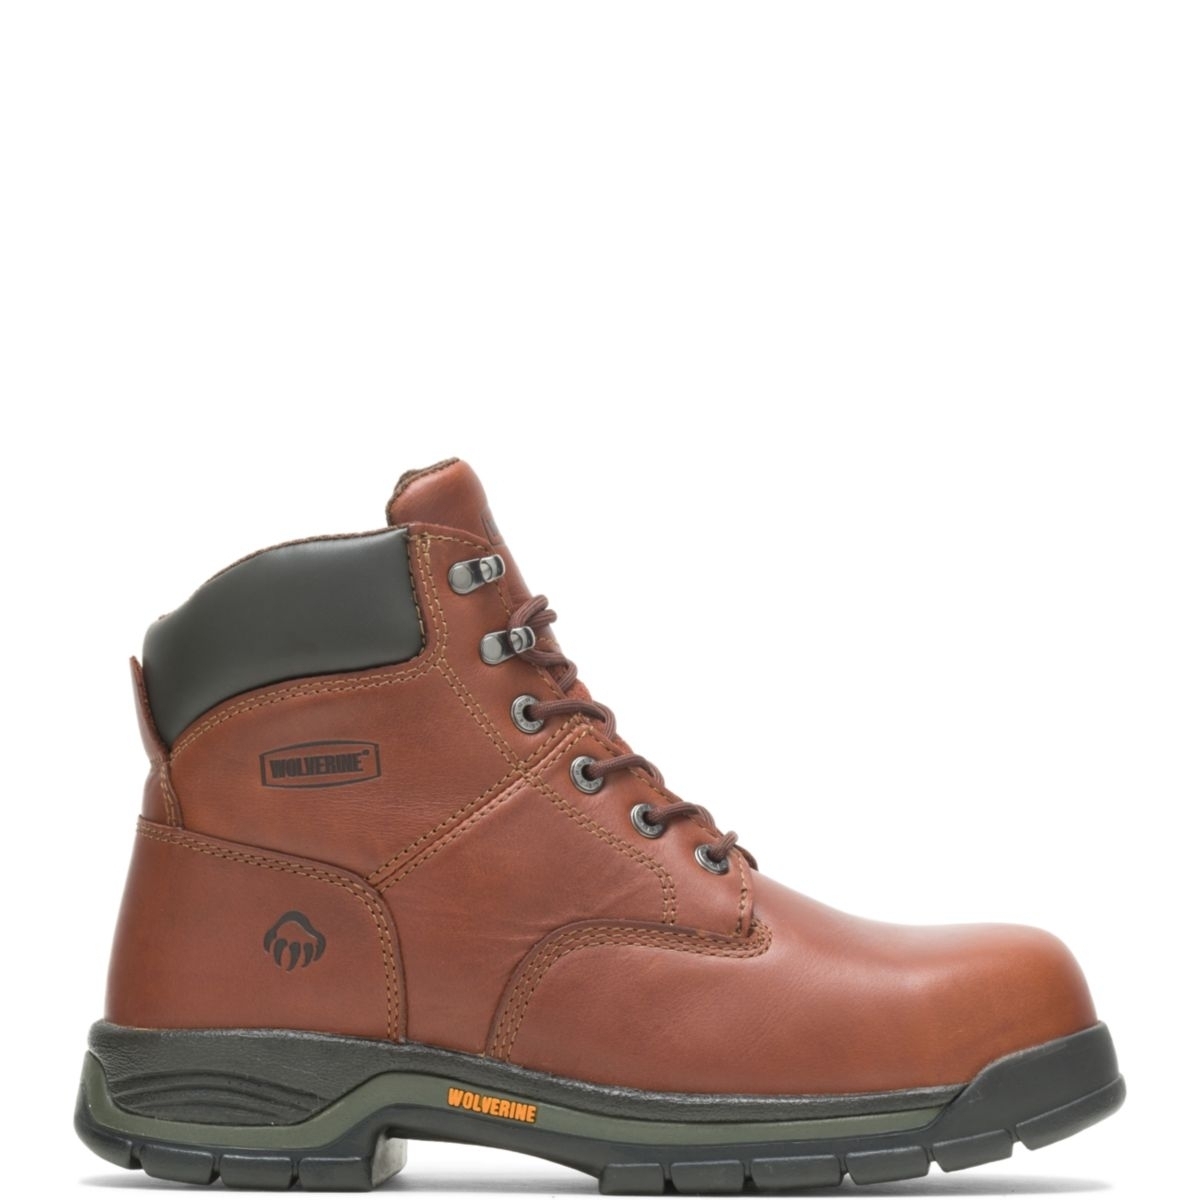 WOLVERINE Men's Harrison 6 Lace-Up SoftToe Work Boot Brown - W04906 Varies BROWN - BROWN, 9.5